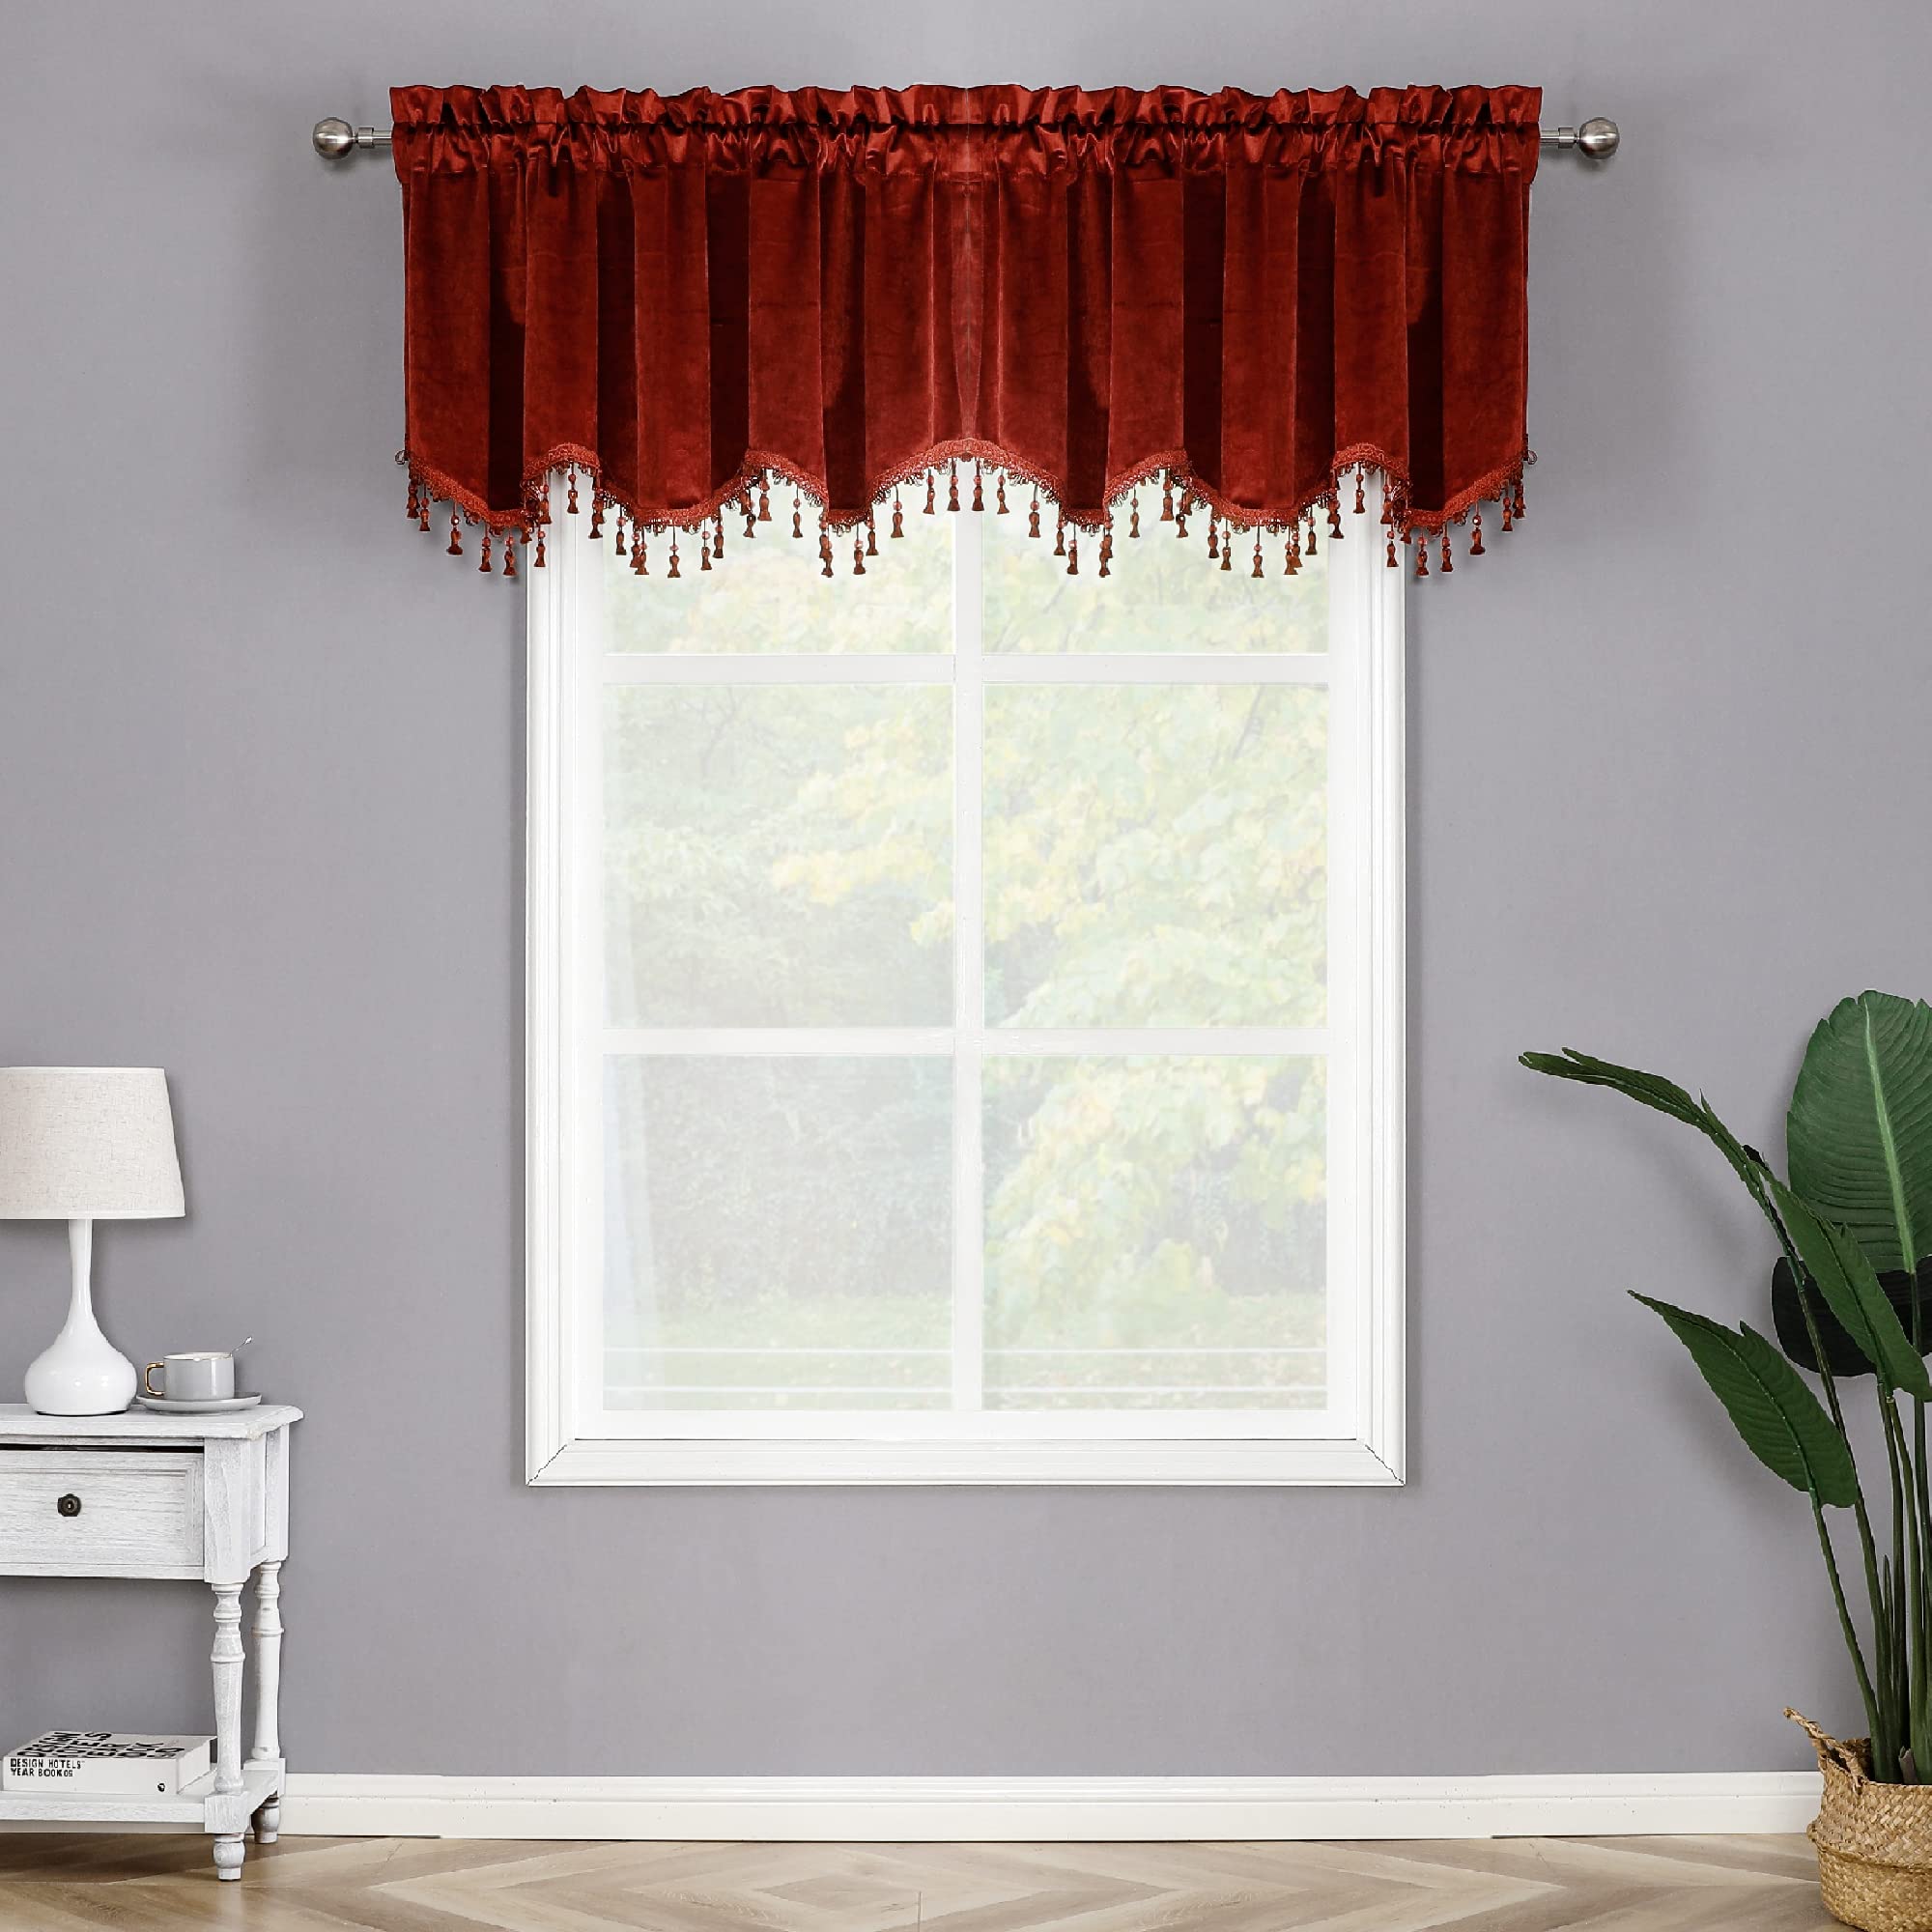 15 Incredible Burgundy Valances For Windows For 2023 1698112189 